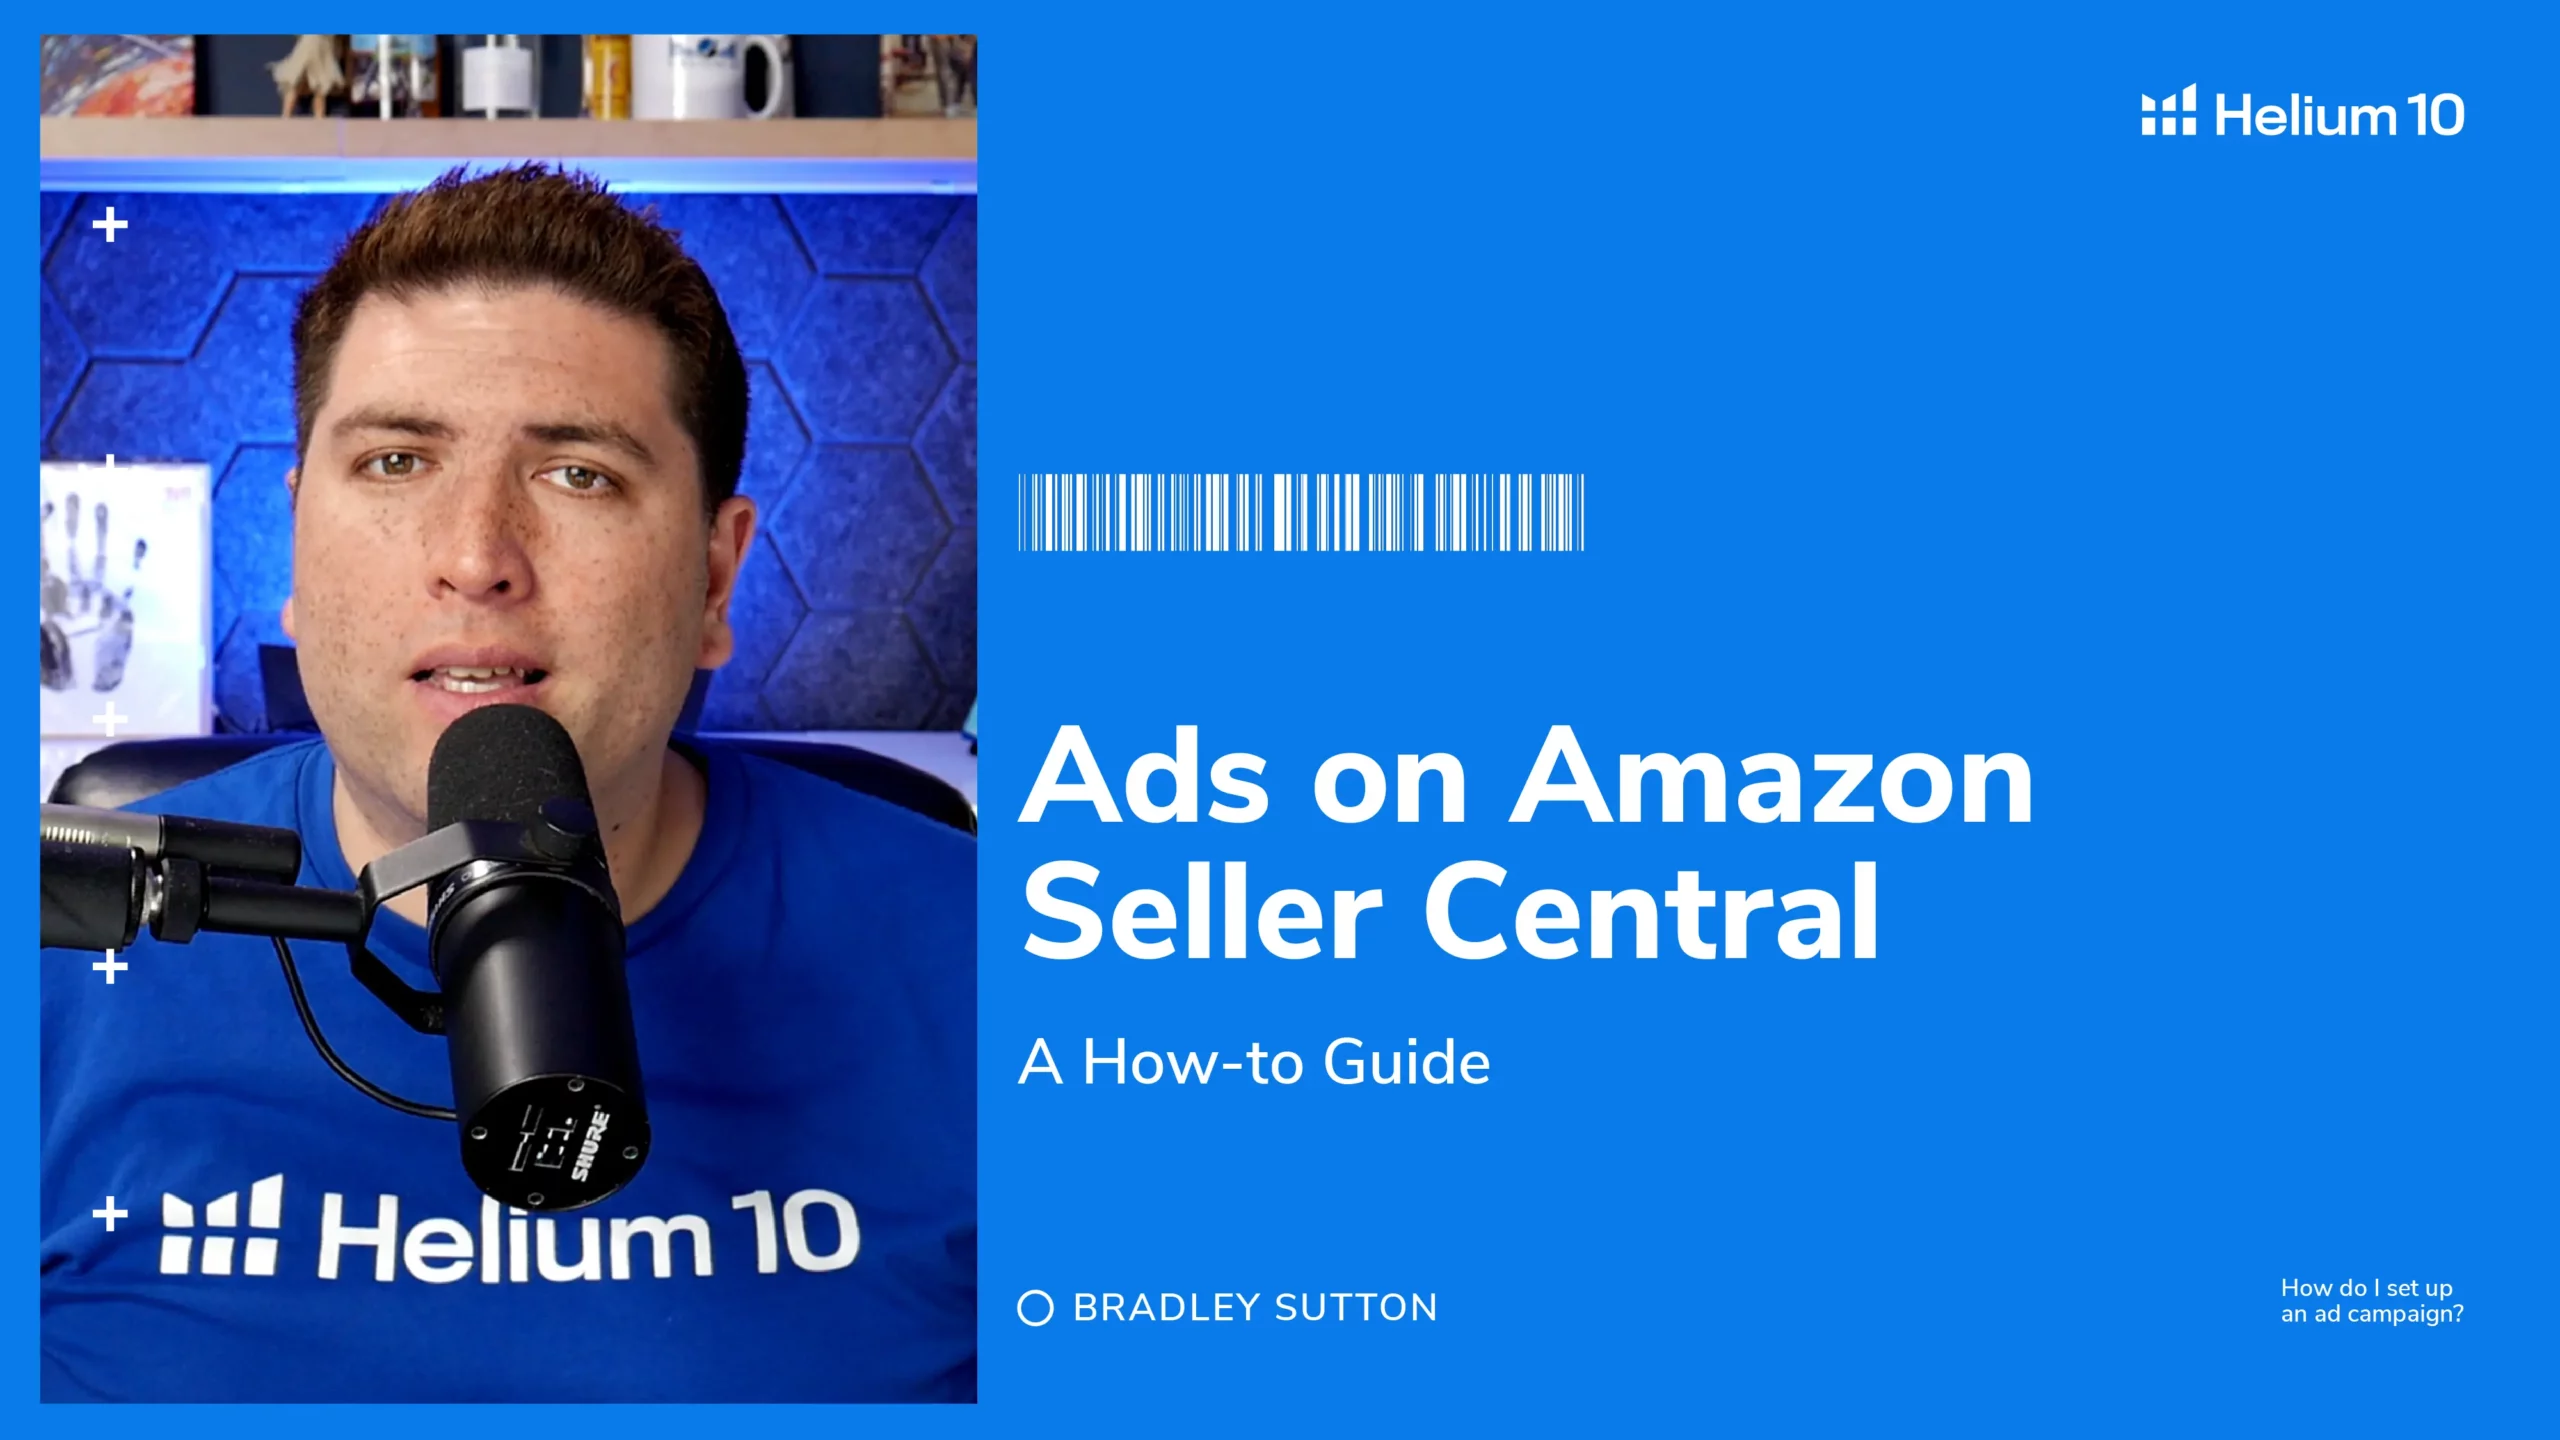 Amazon Ads: How to Setup Amazon Advertising in Seller Central